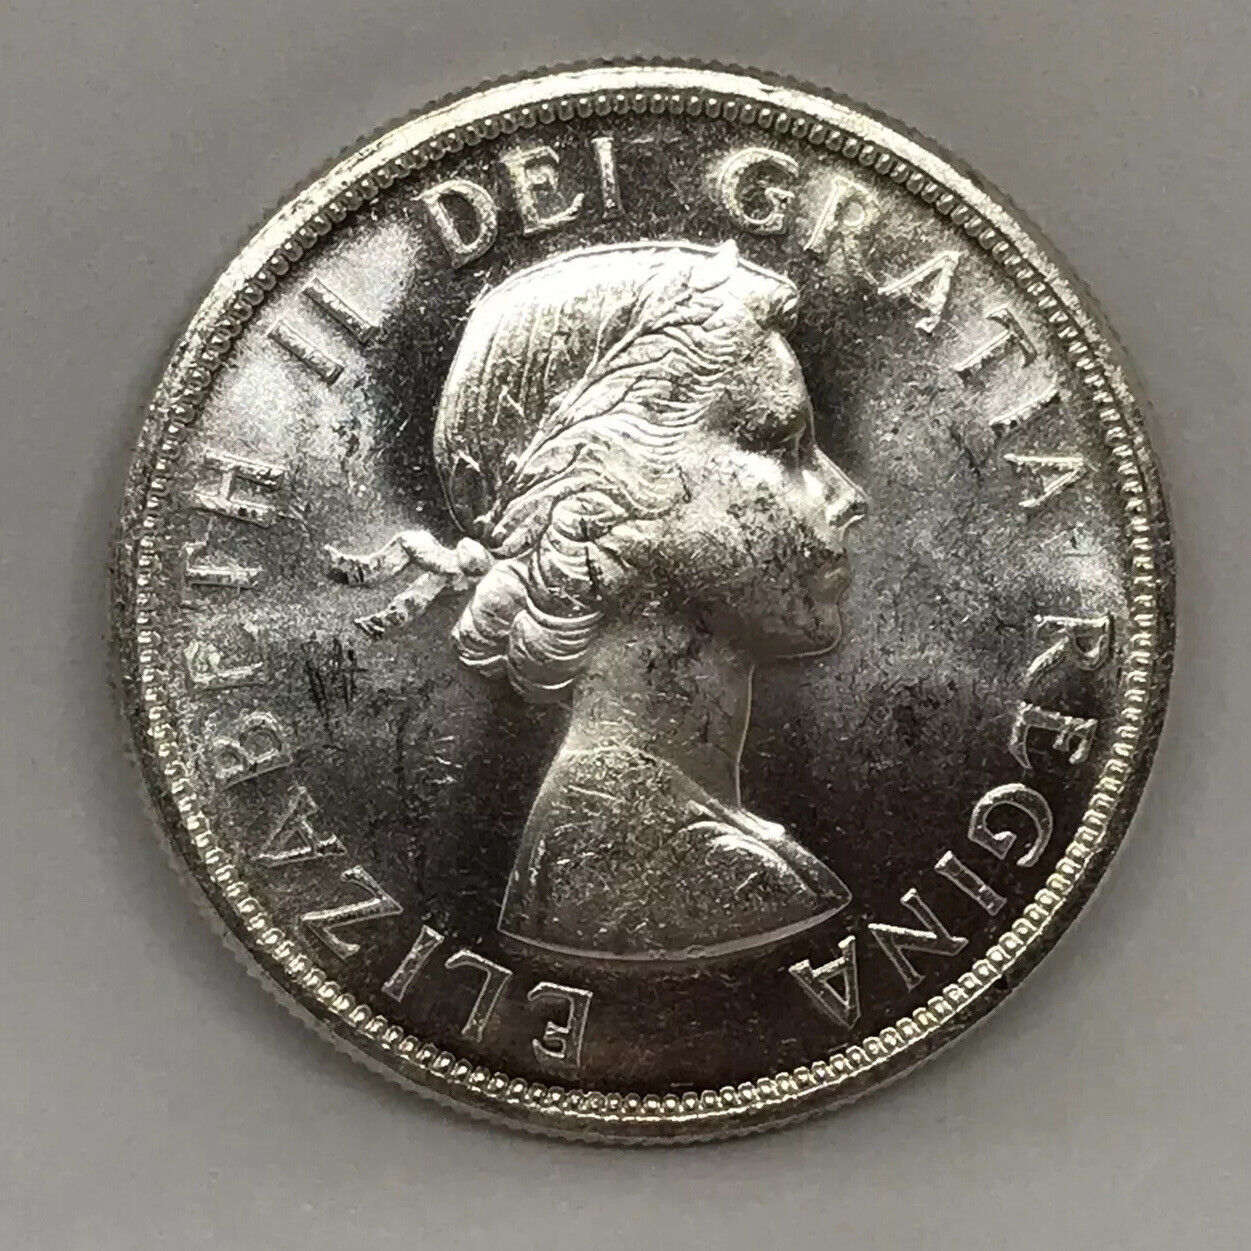 1963 Canadian $1 Voyageur Silver Dollar $1 Coin ( Free Worldwide Shipping )